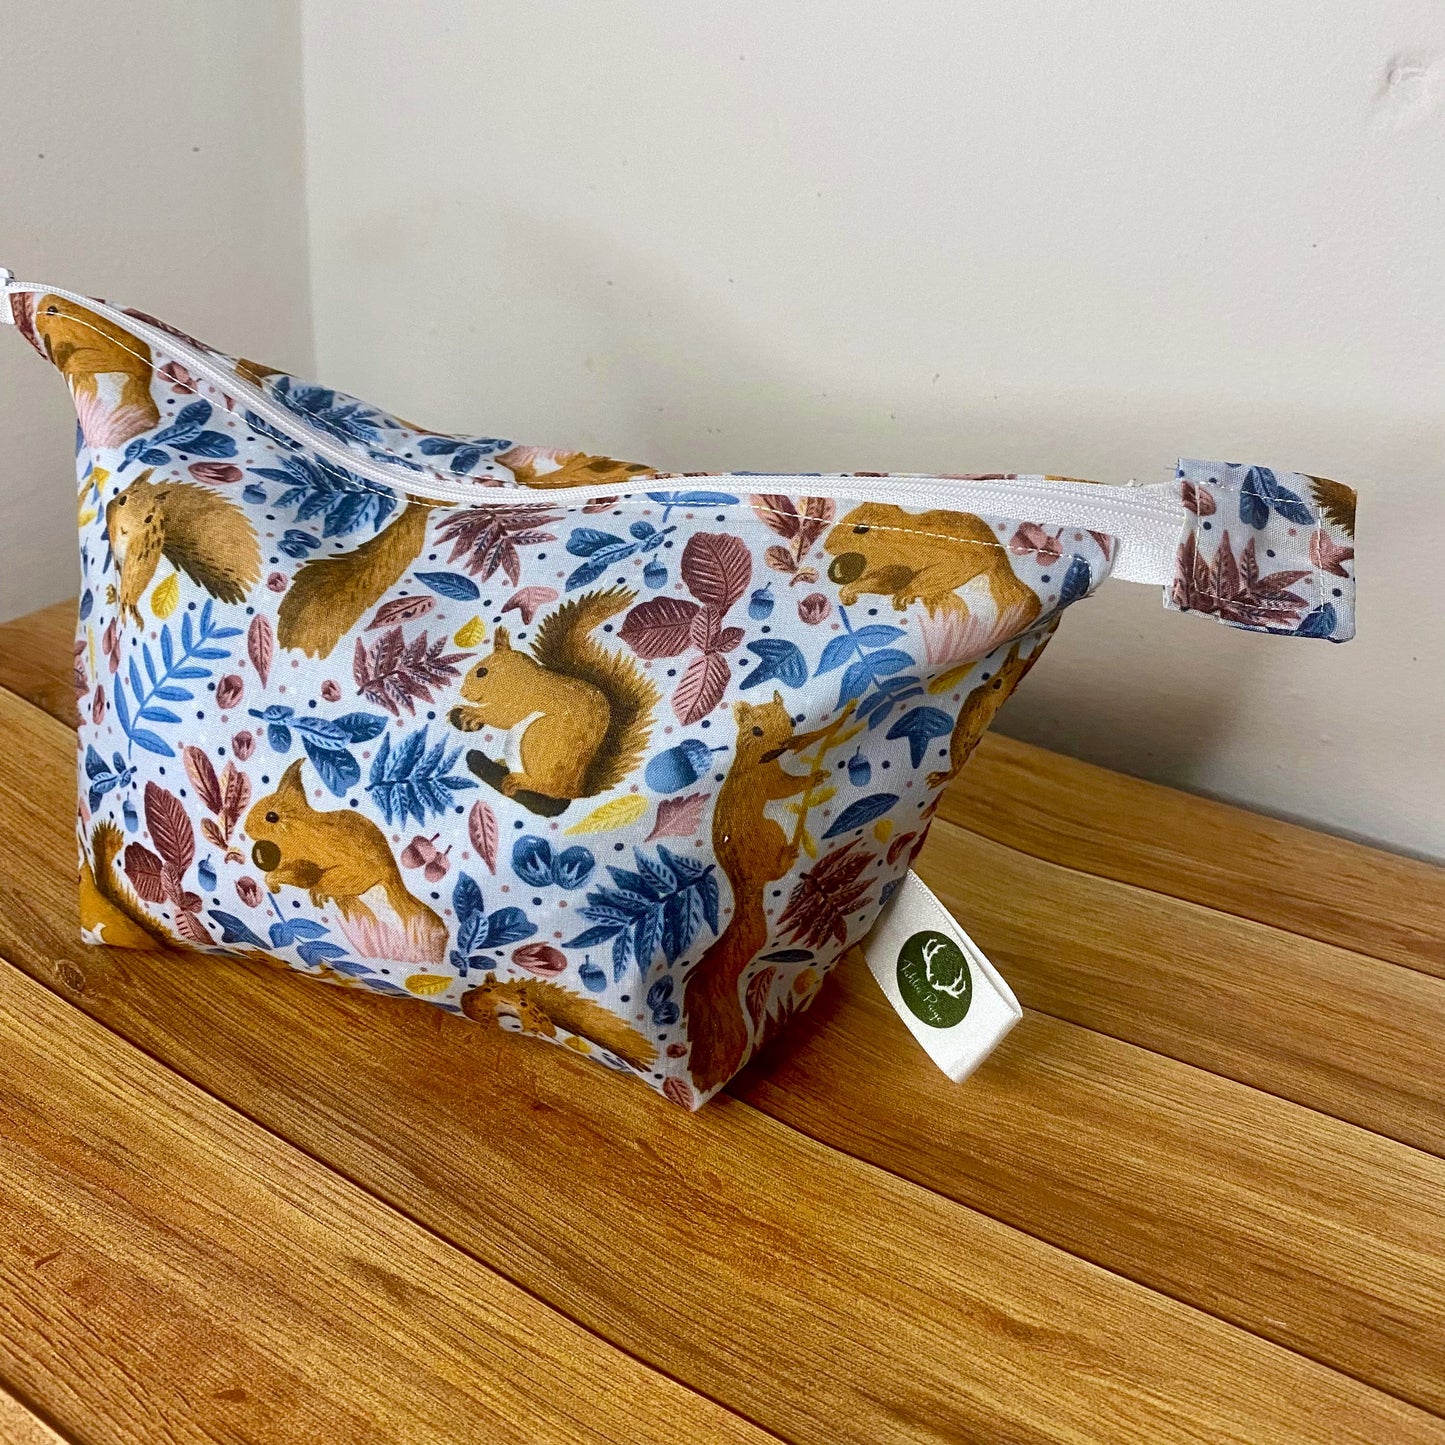 Red squirrel makeup bag stuffed to show the shape and size.